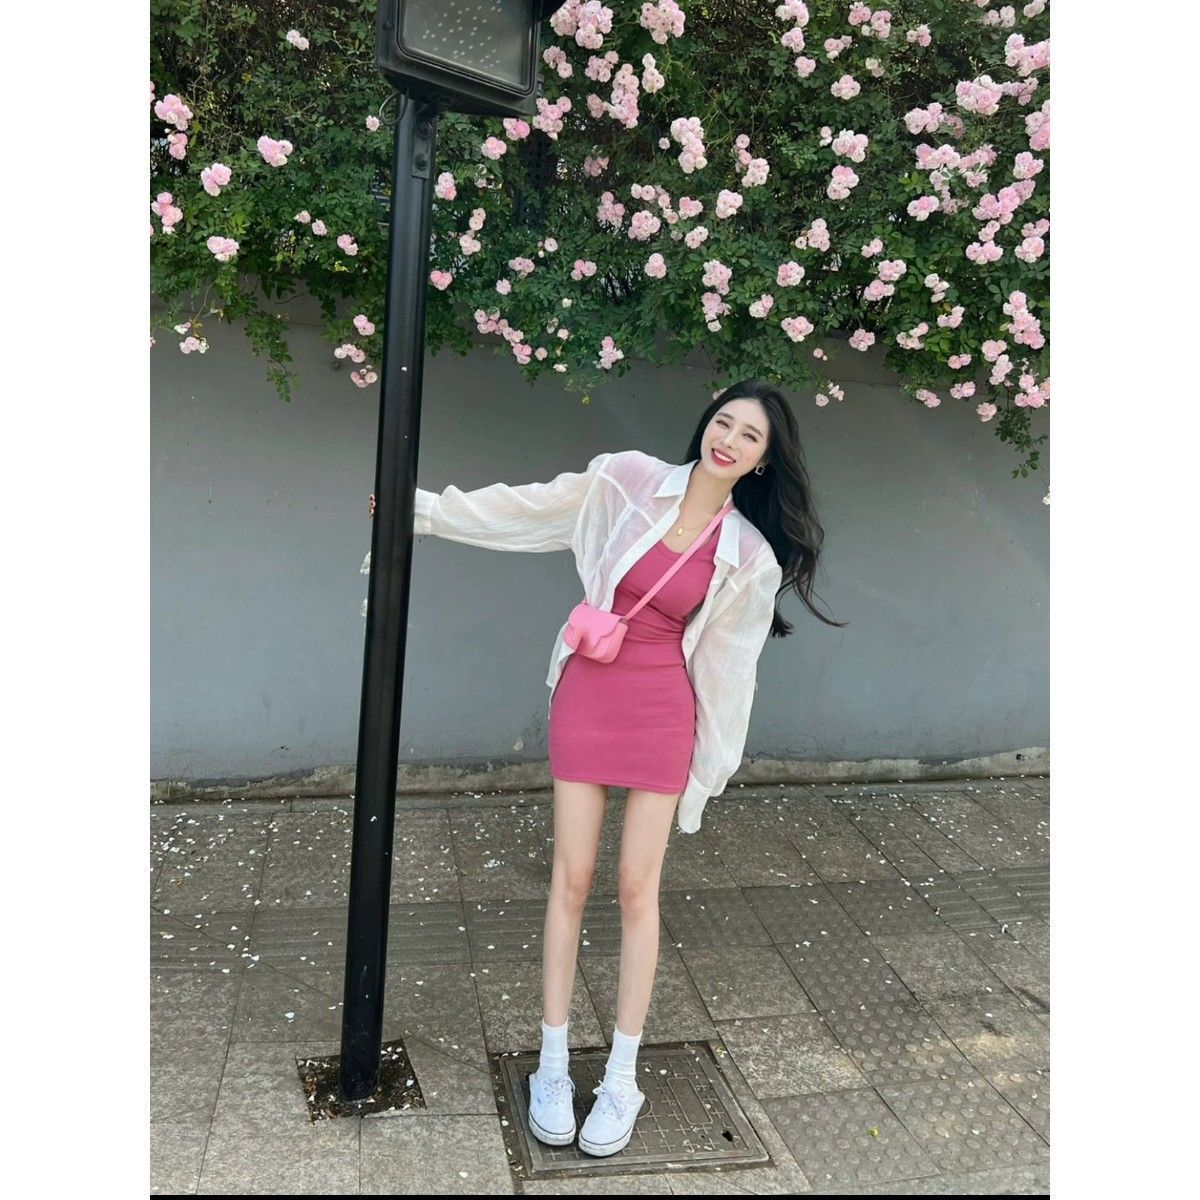 Two-piece suit 2022 summer rose red pure desire style sexy knitted hip dress + sun protection shirt coat